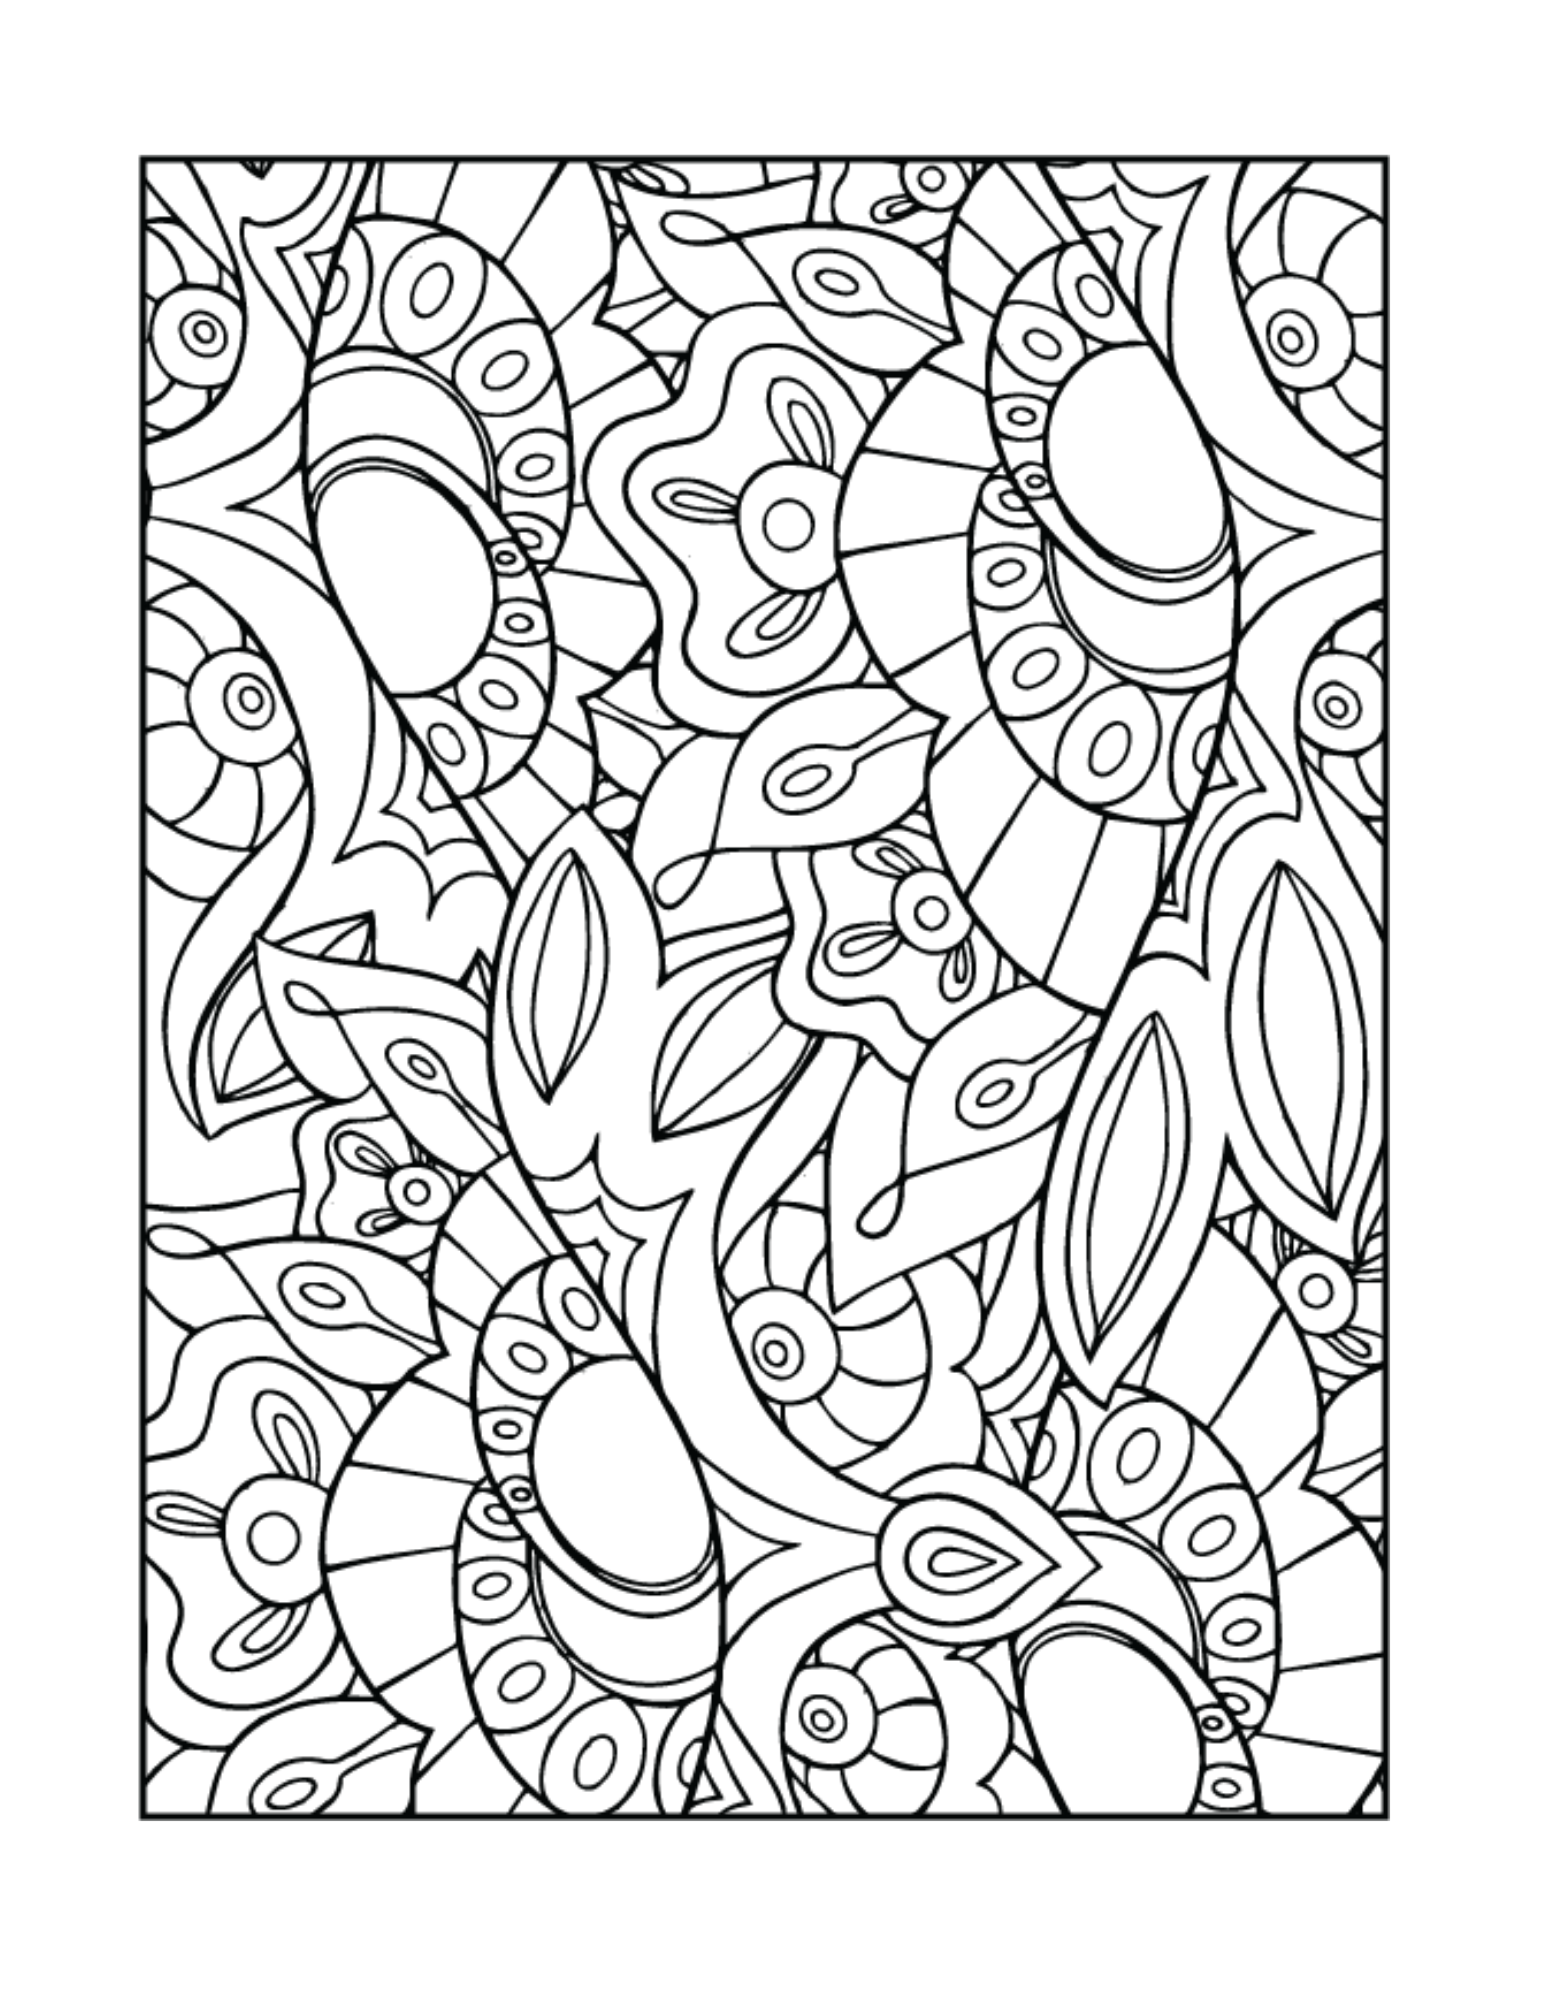 Meditation Coloring Book for Adults: Mandala Designs to Relax Your Mind,  Body and Soul: Anti-Stress Coloring Book for Adults (Paperback)